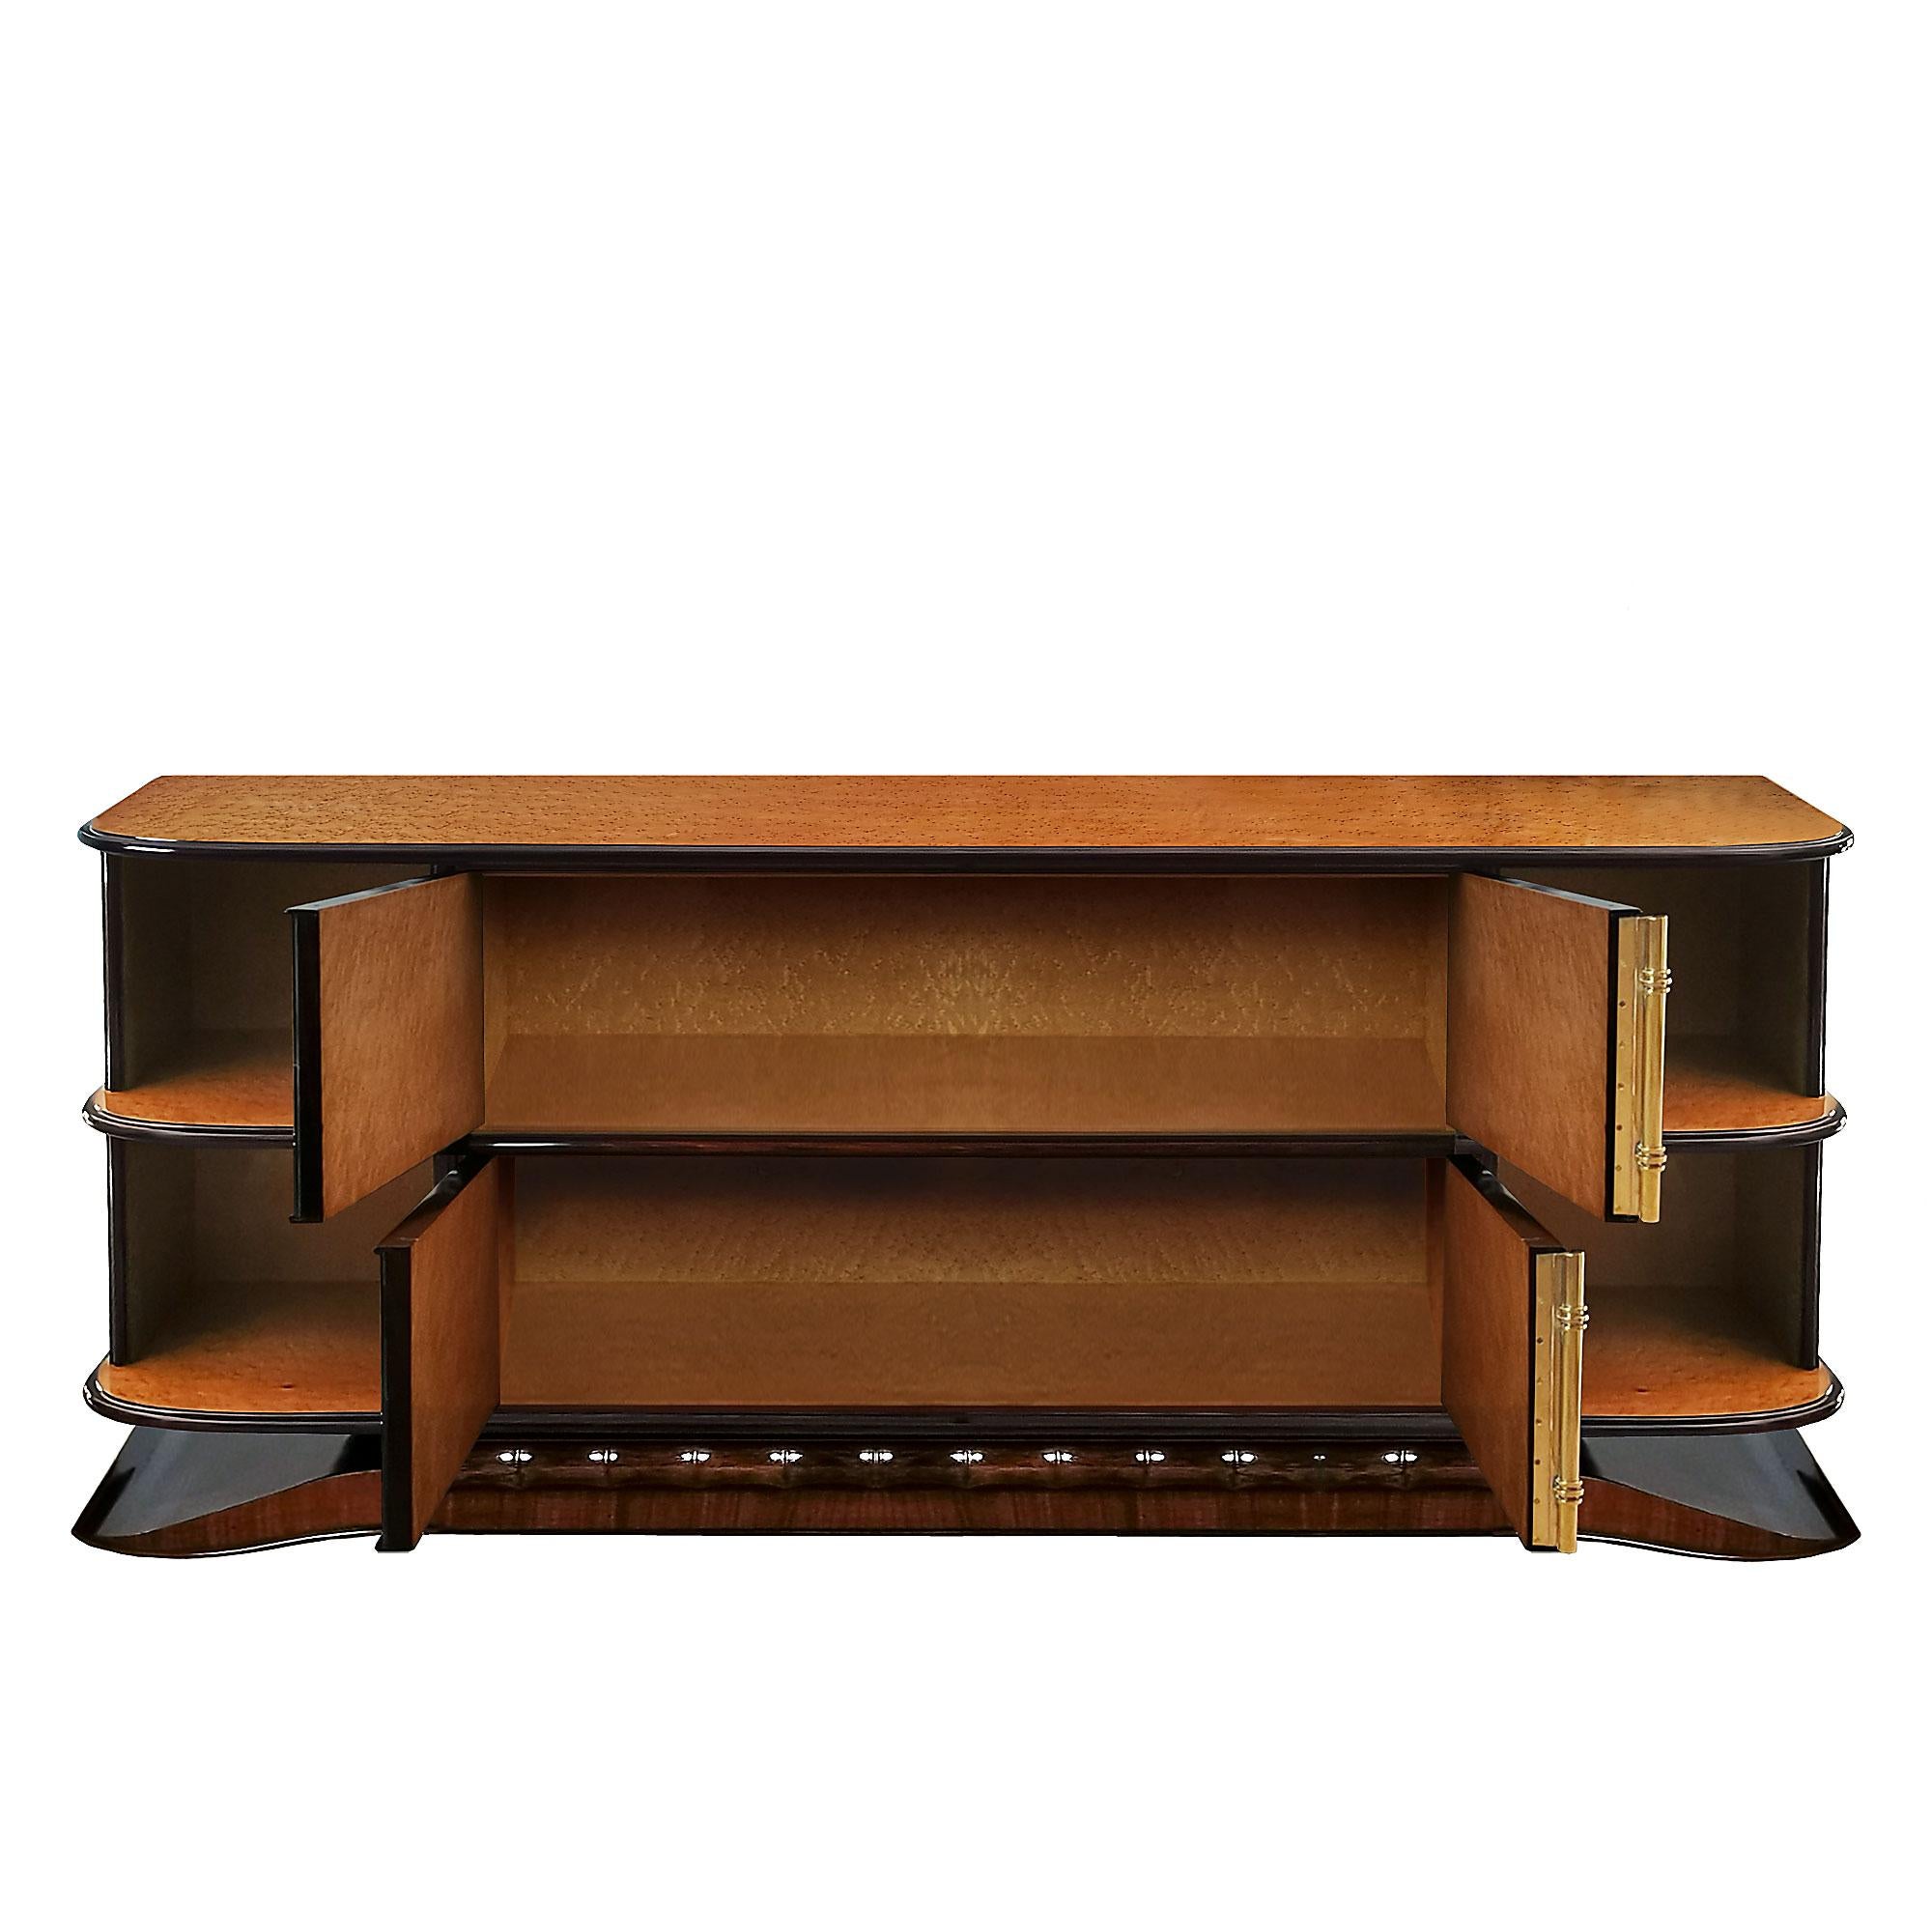 Mid-20th Century 1930's Art Deco Sideboard, Birdseye Maple, Mahogany, Mirrors and Brass - Italy For Sale